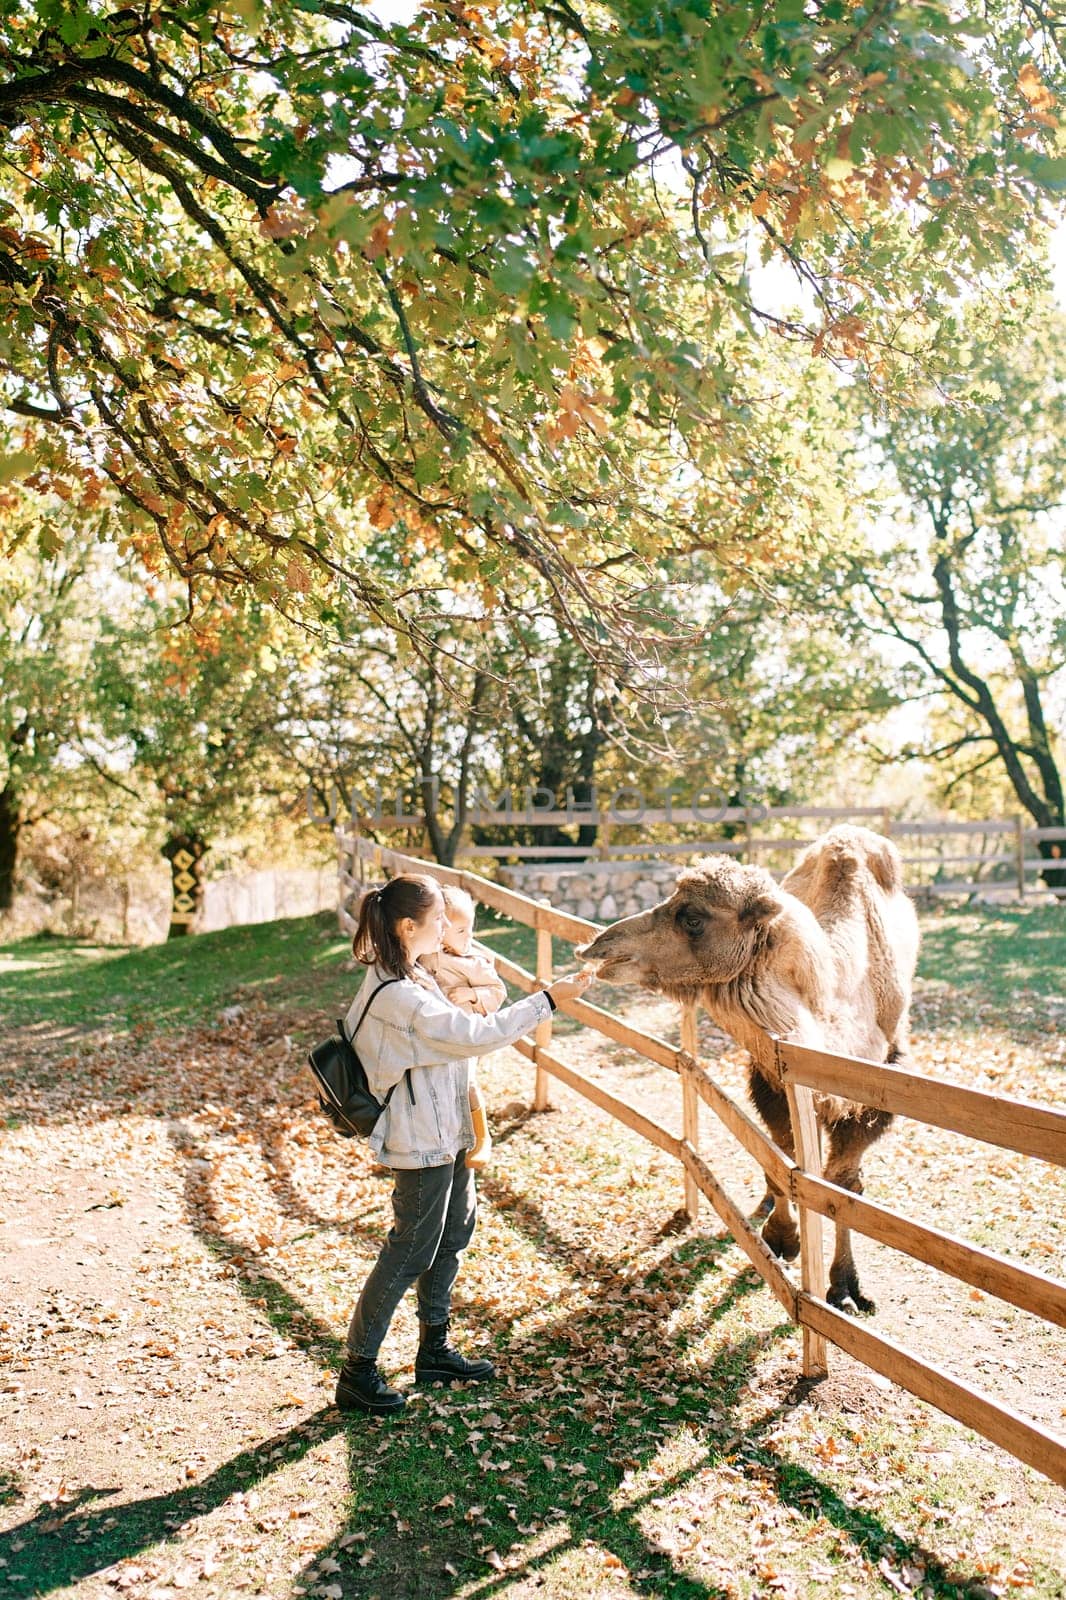 Mom with a little girl in her arms feeds carrots to a camel peeking out from behind the fence. High quality photo